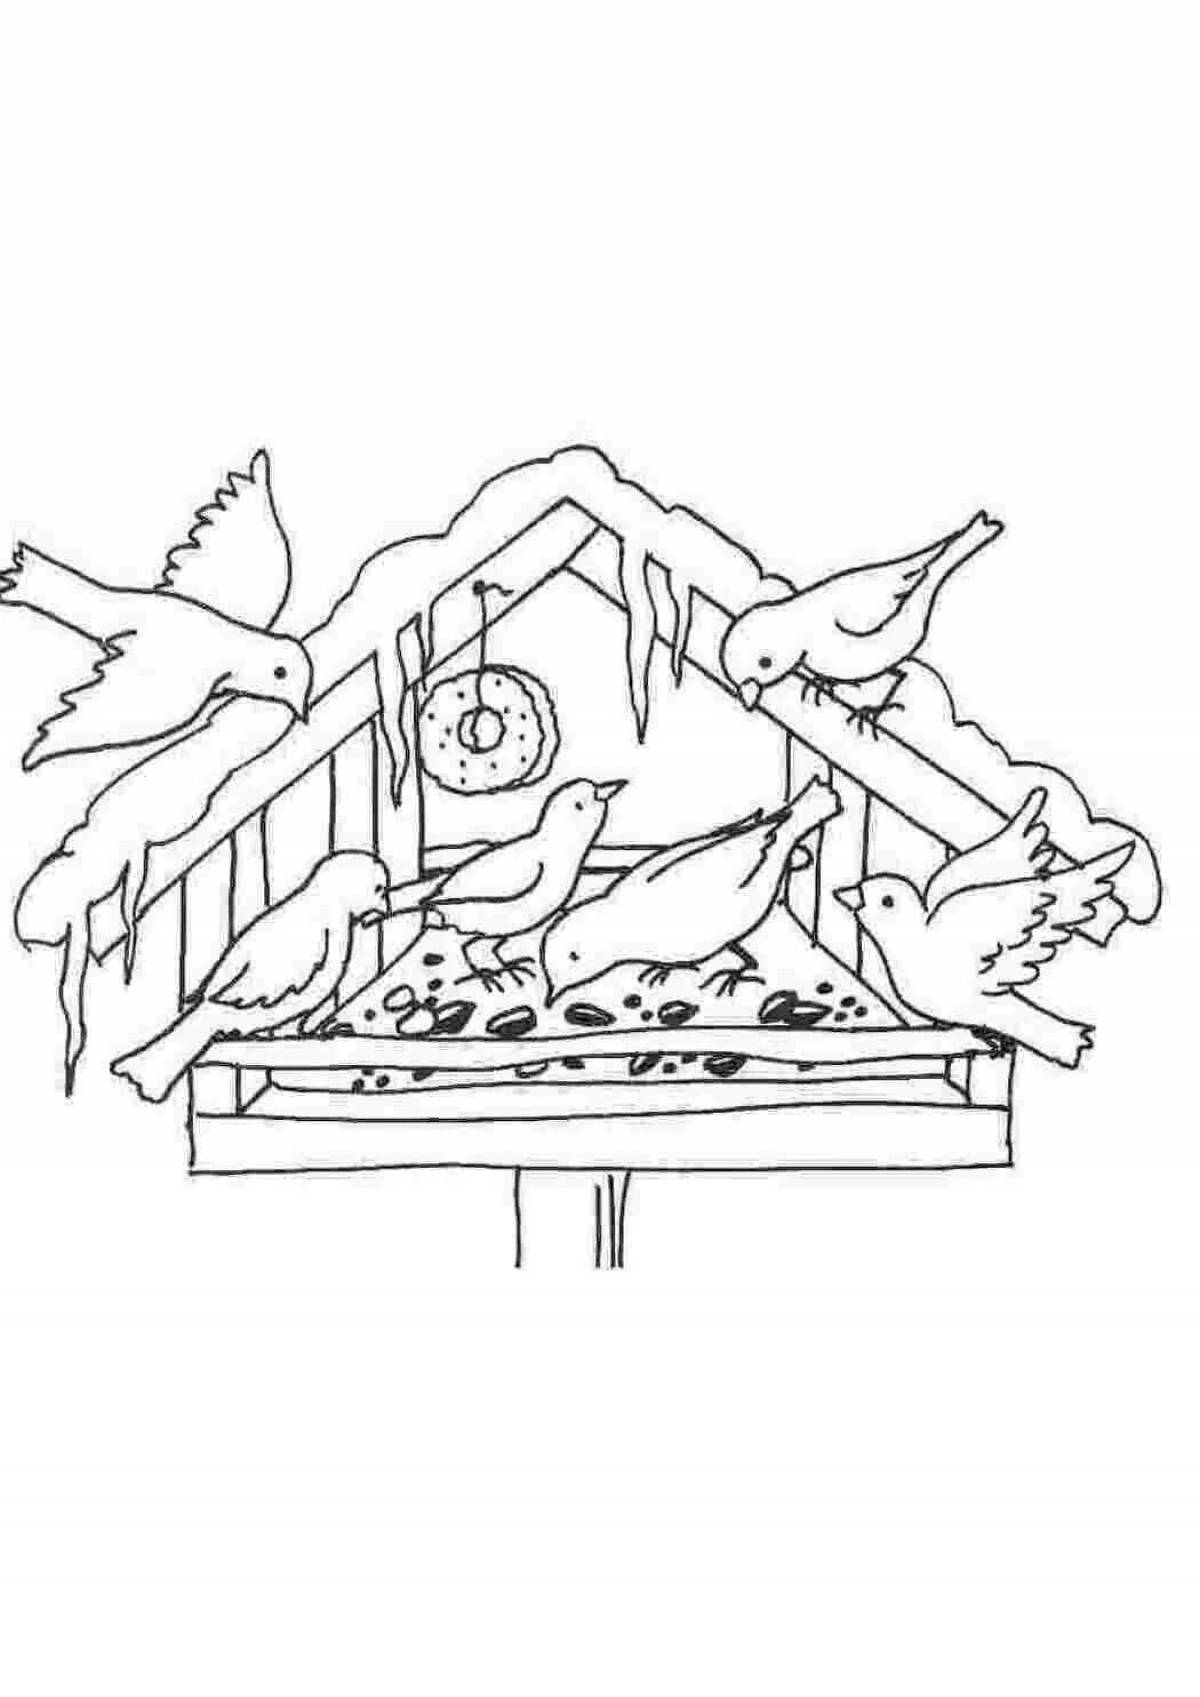 Playful bird feeder coloring page for kids